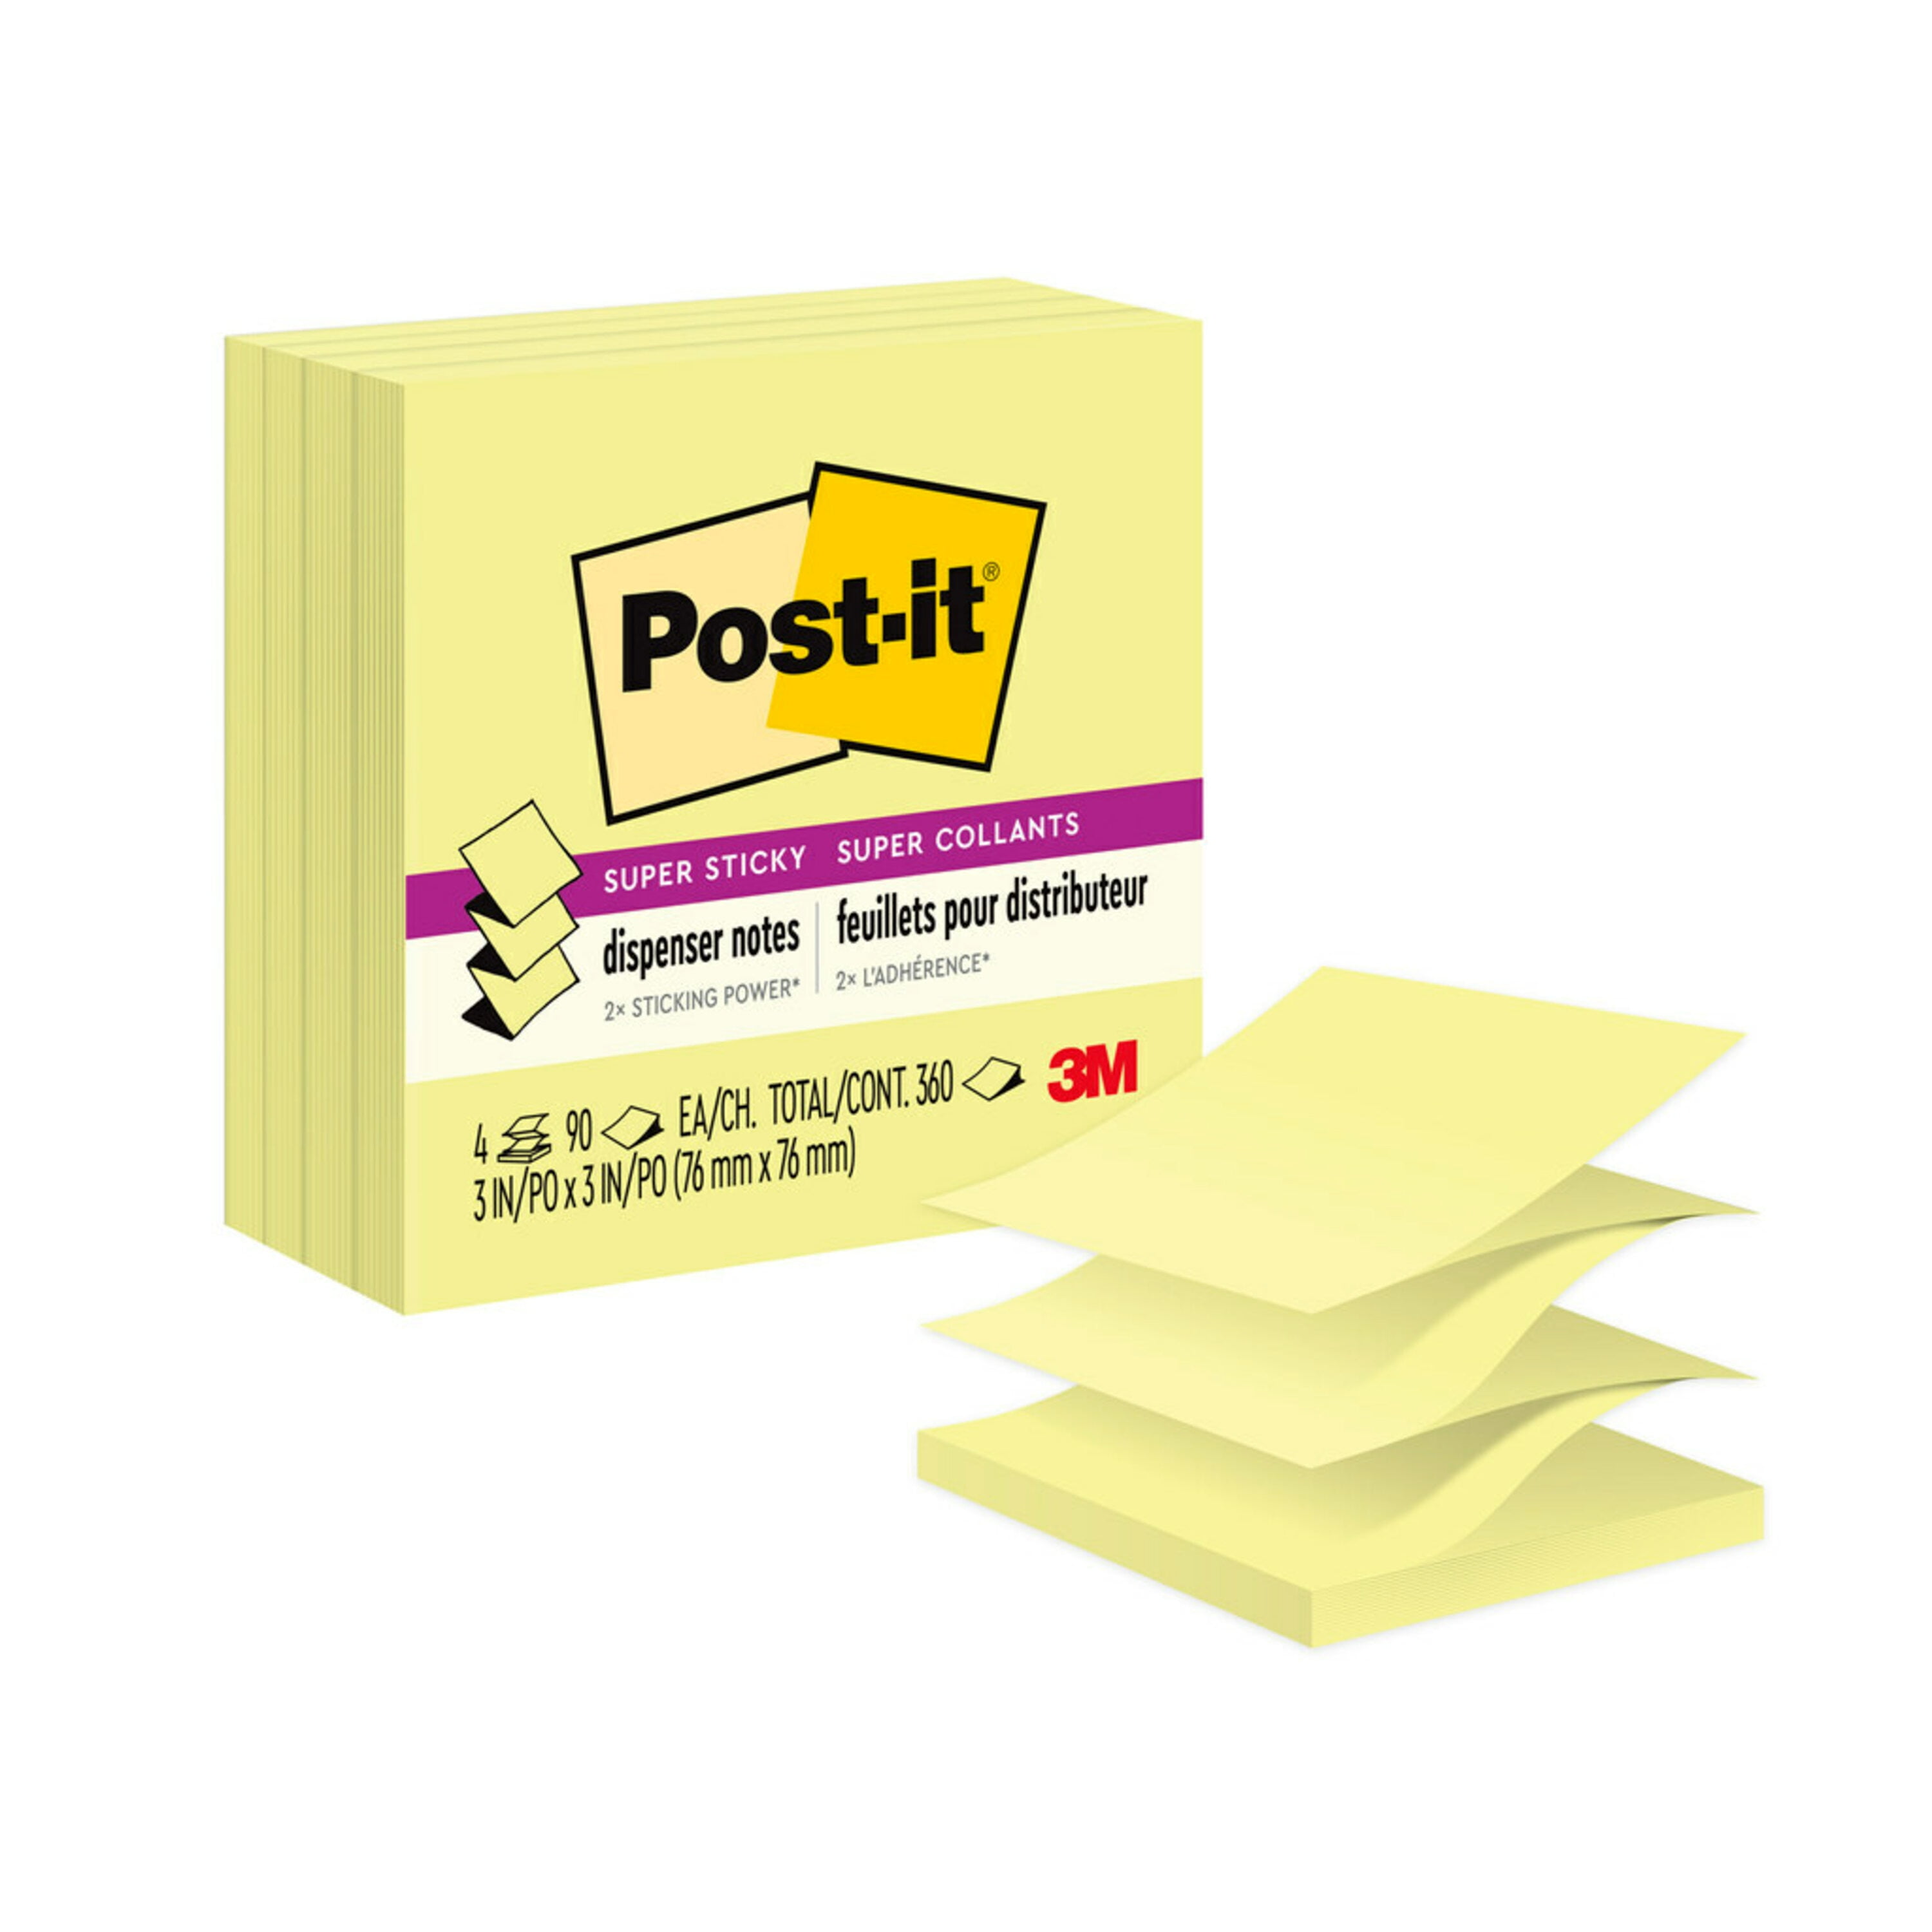 Post-it Transparent Notes, Clear, 2.8 in. x 2 .8 in., 36 Sheets, 1 Pad 